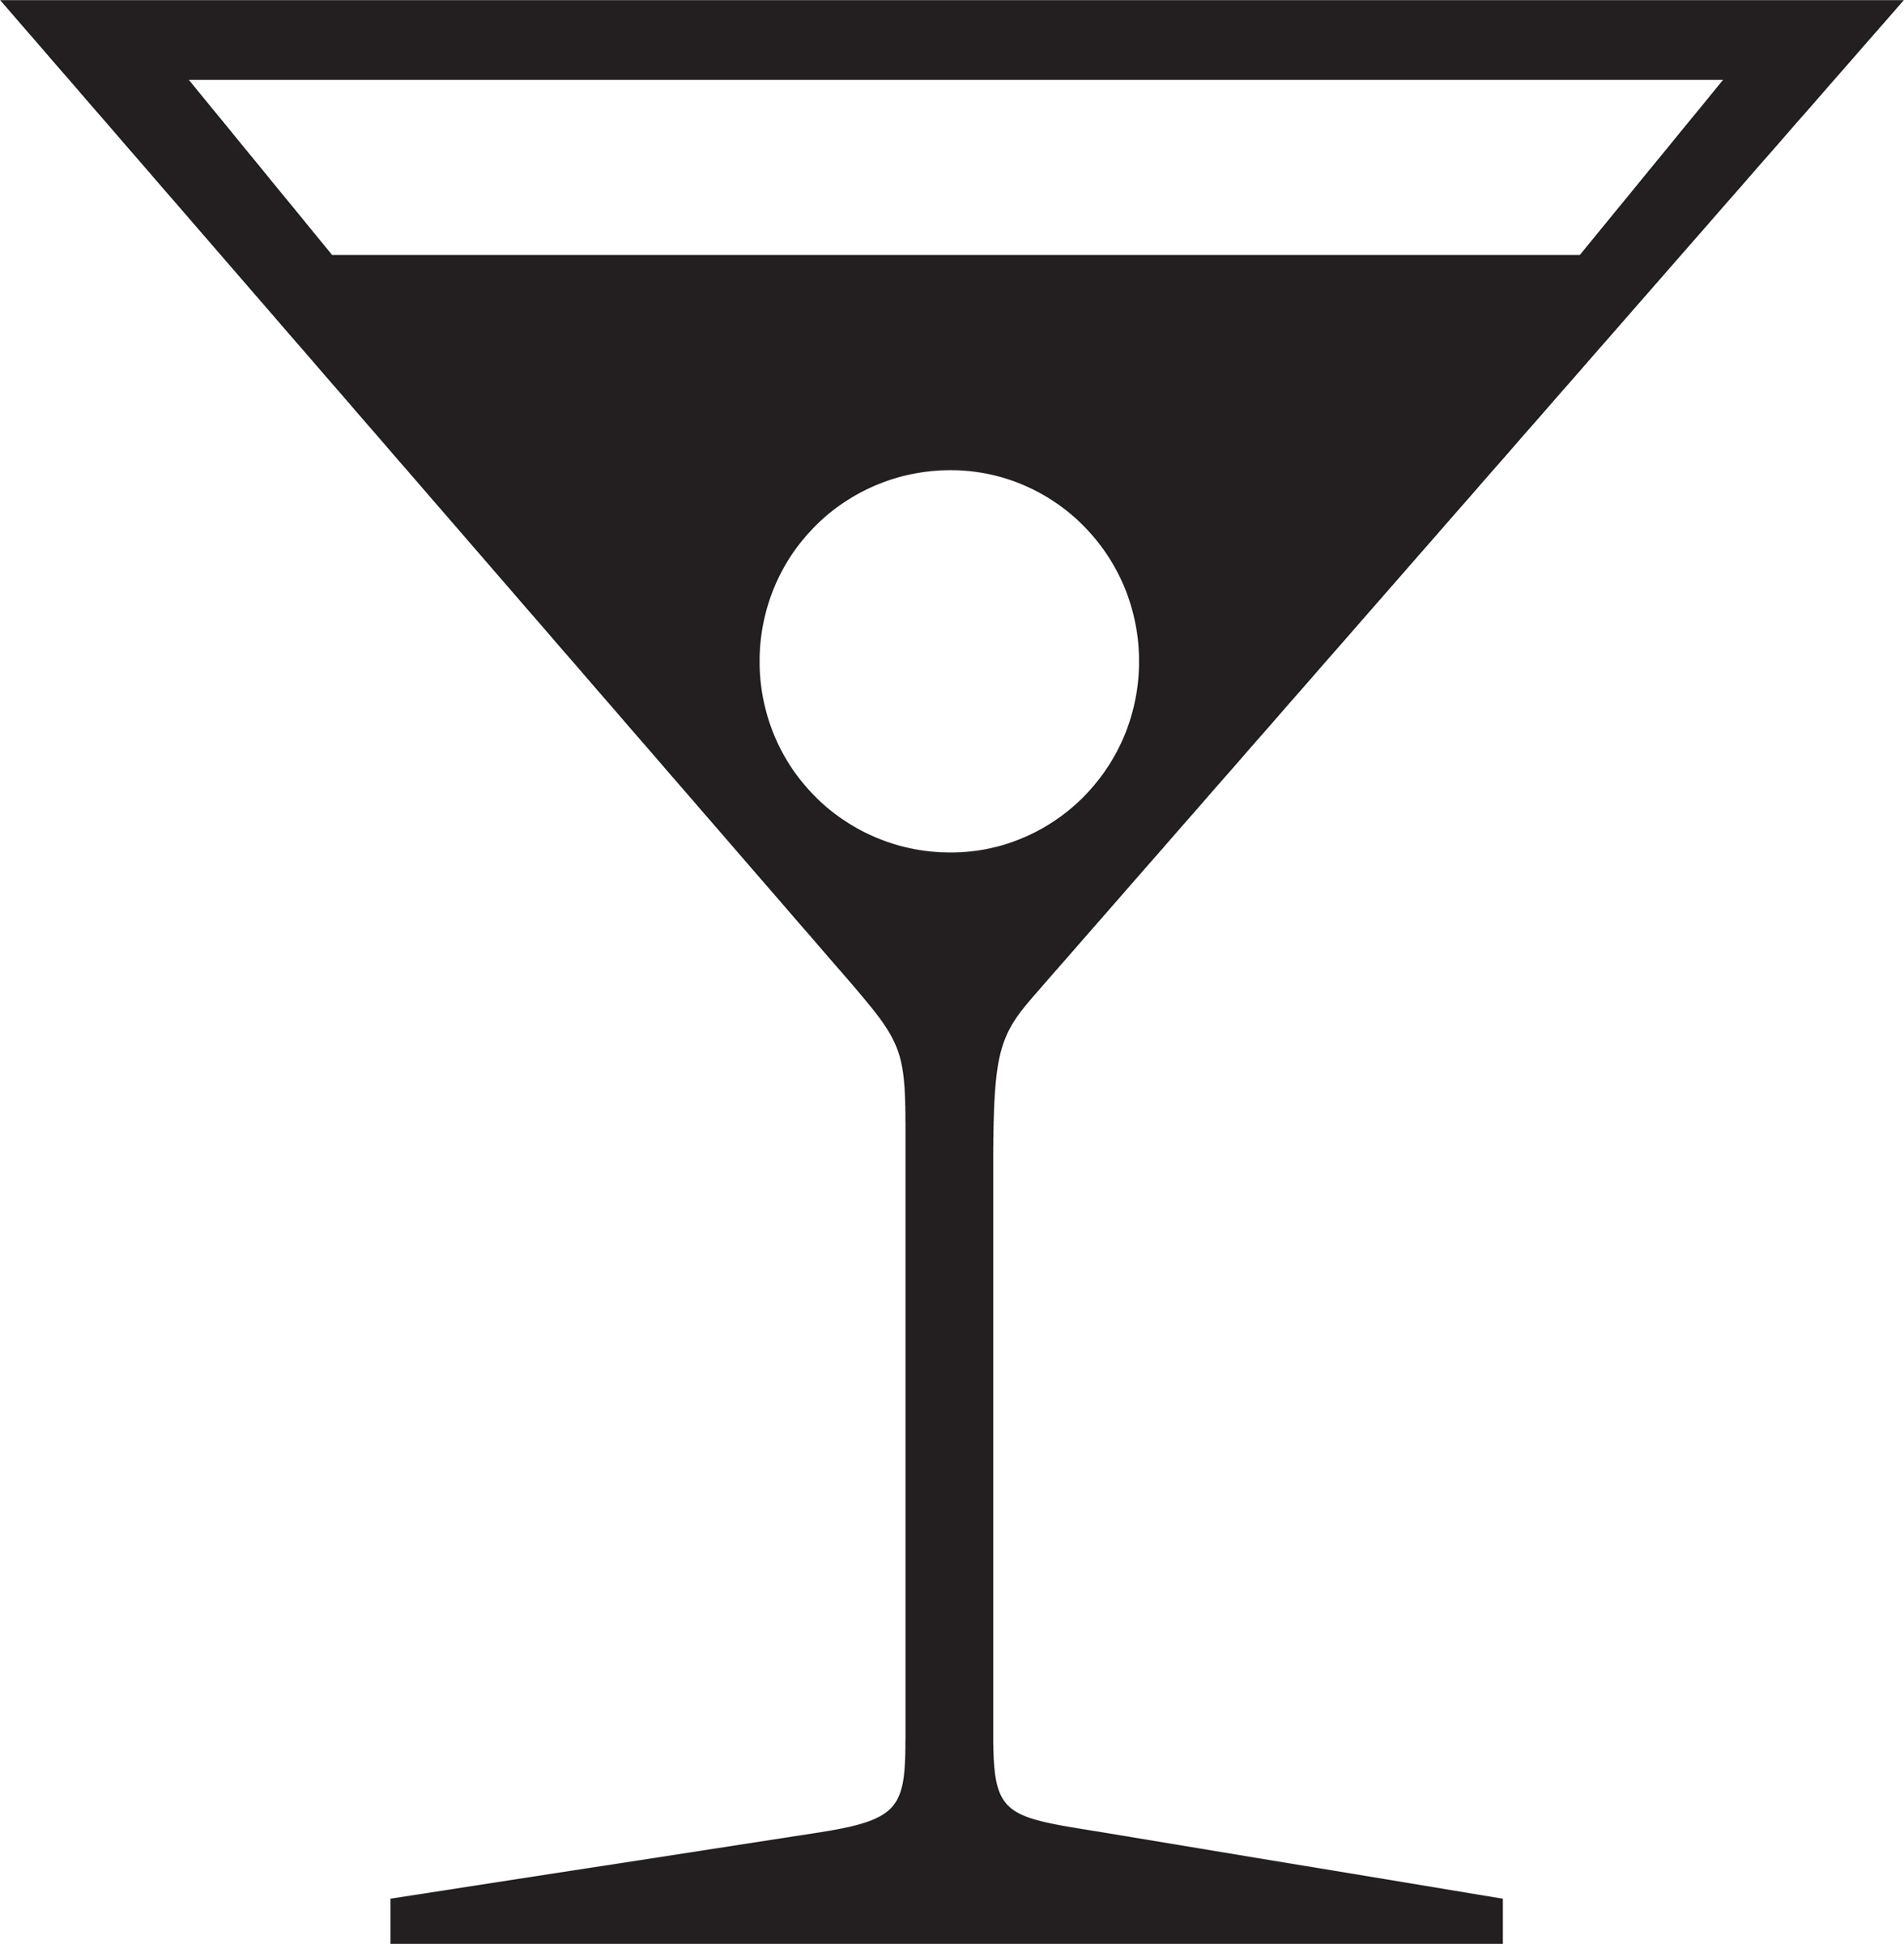 Martini Glass Clip Art to Download - dbclipart.com